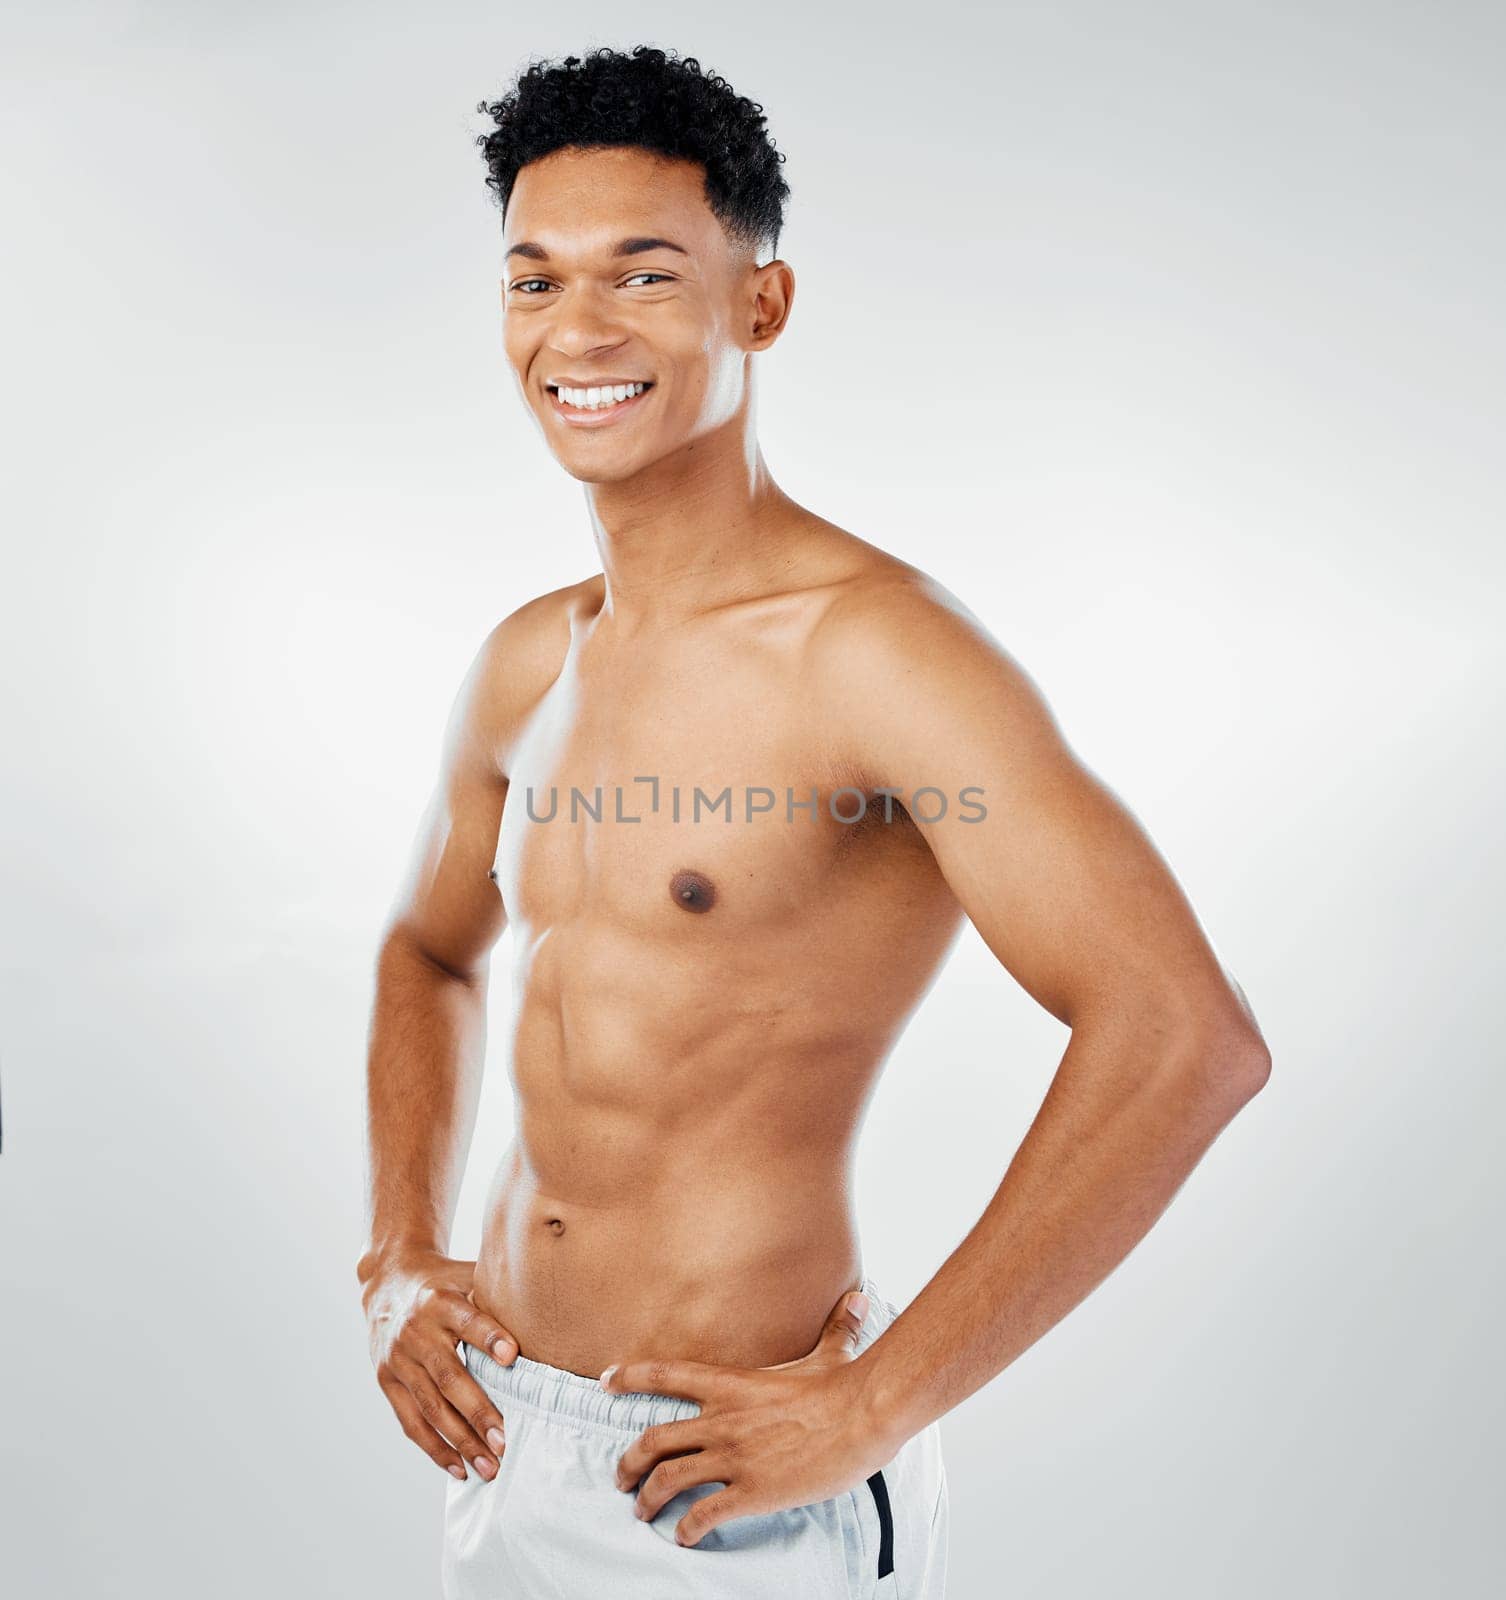 Fitness, health and a portrait of topless man with muscles, mindset and motivation for sports workout. Exercise, gym and a bodybuilder with smile on face, growth and healthy body for happy lifestyle